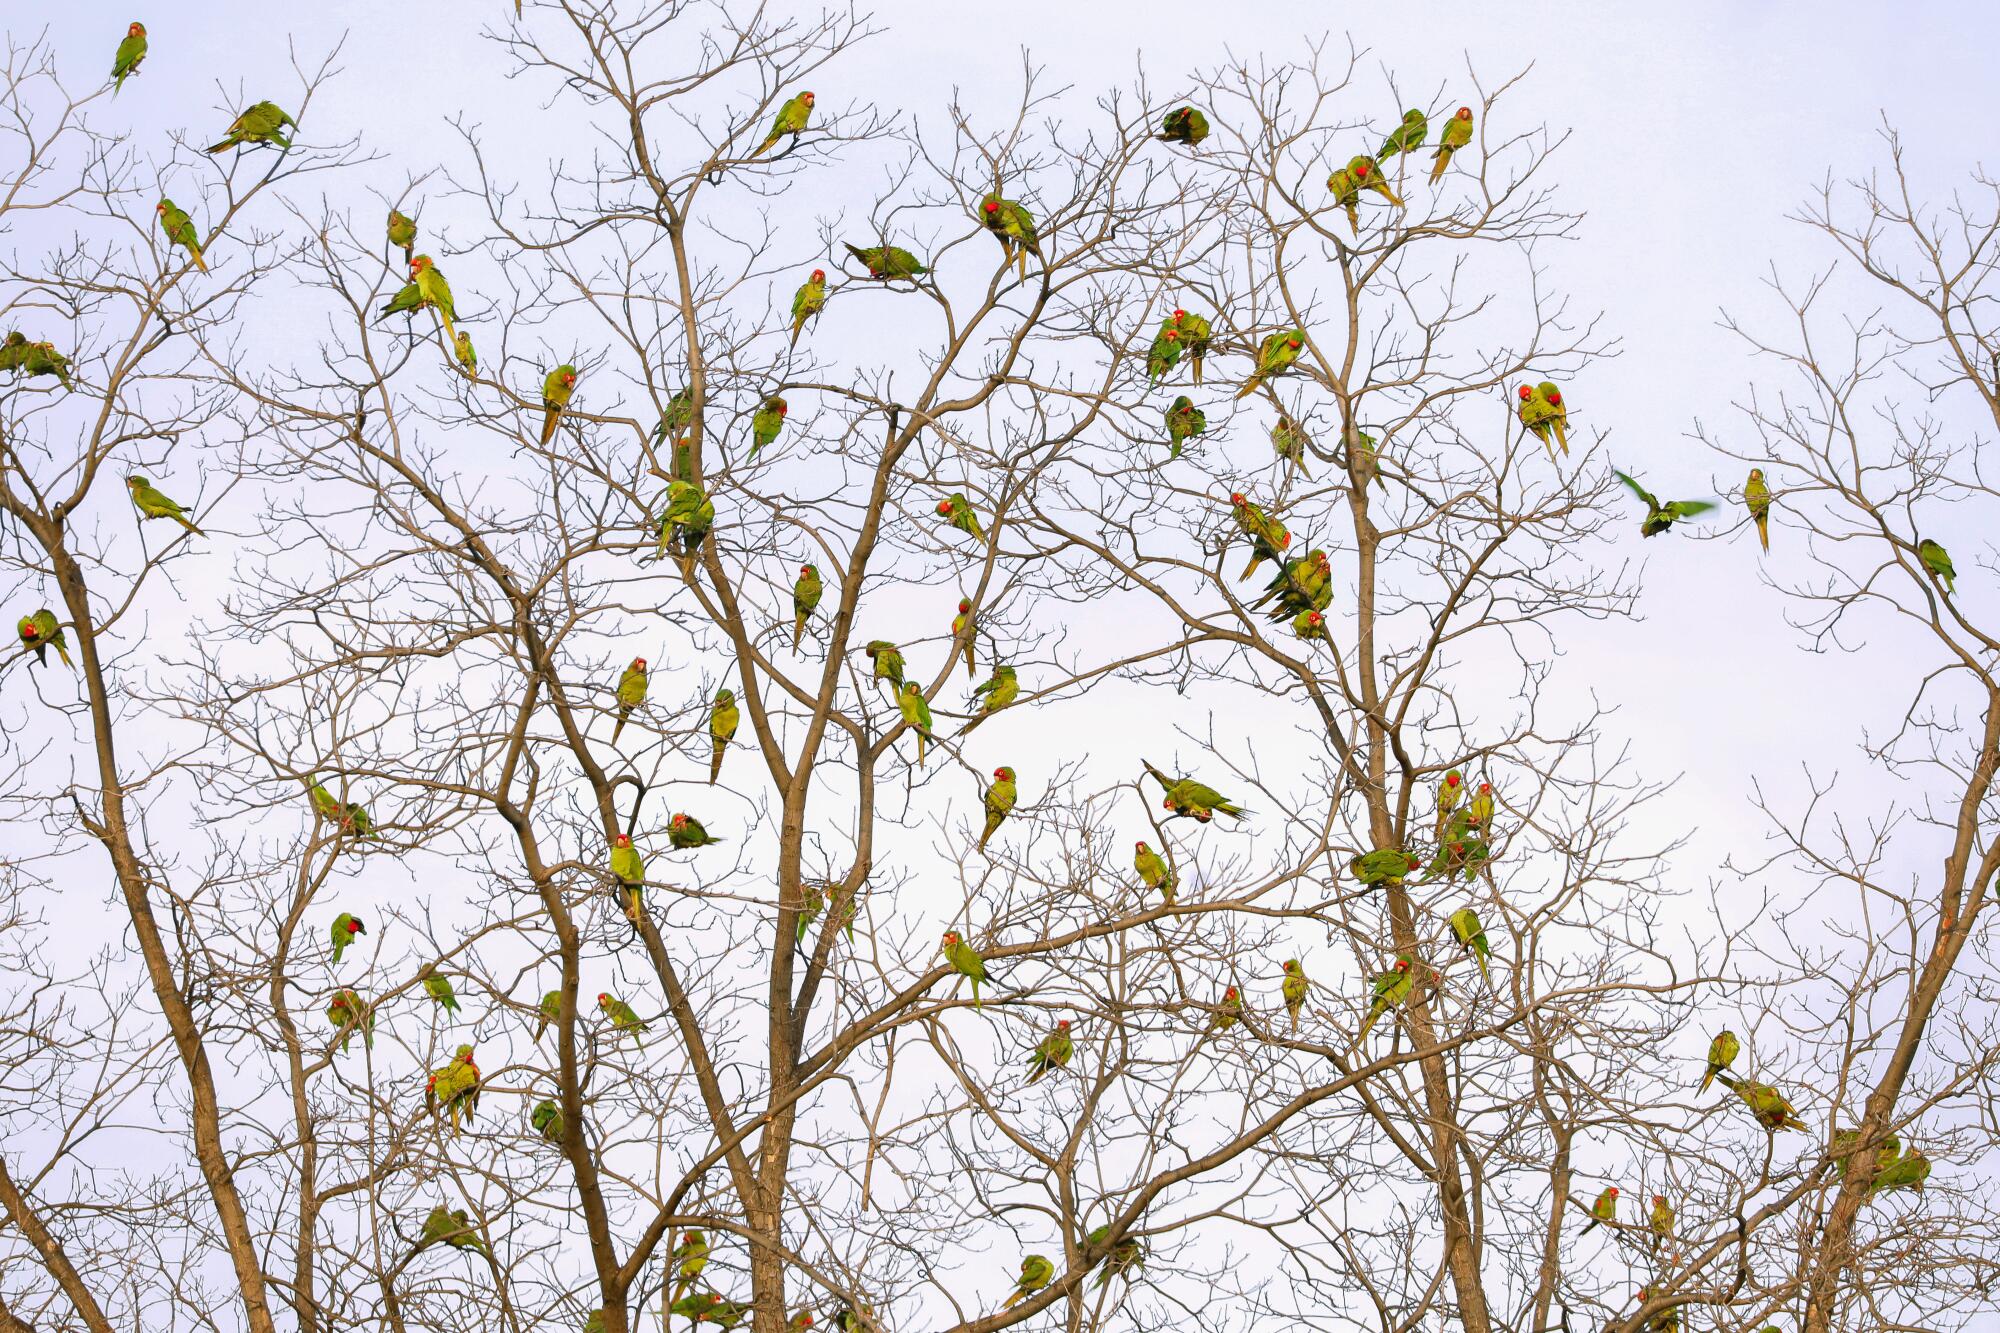 Parrots fill the branches of a tree.